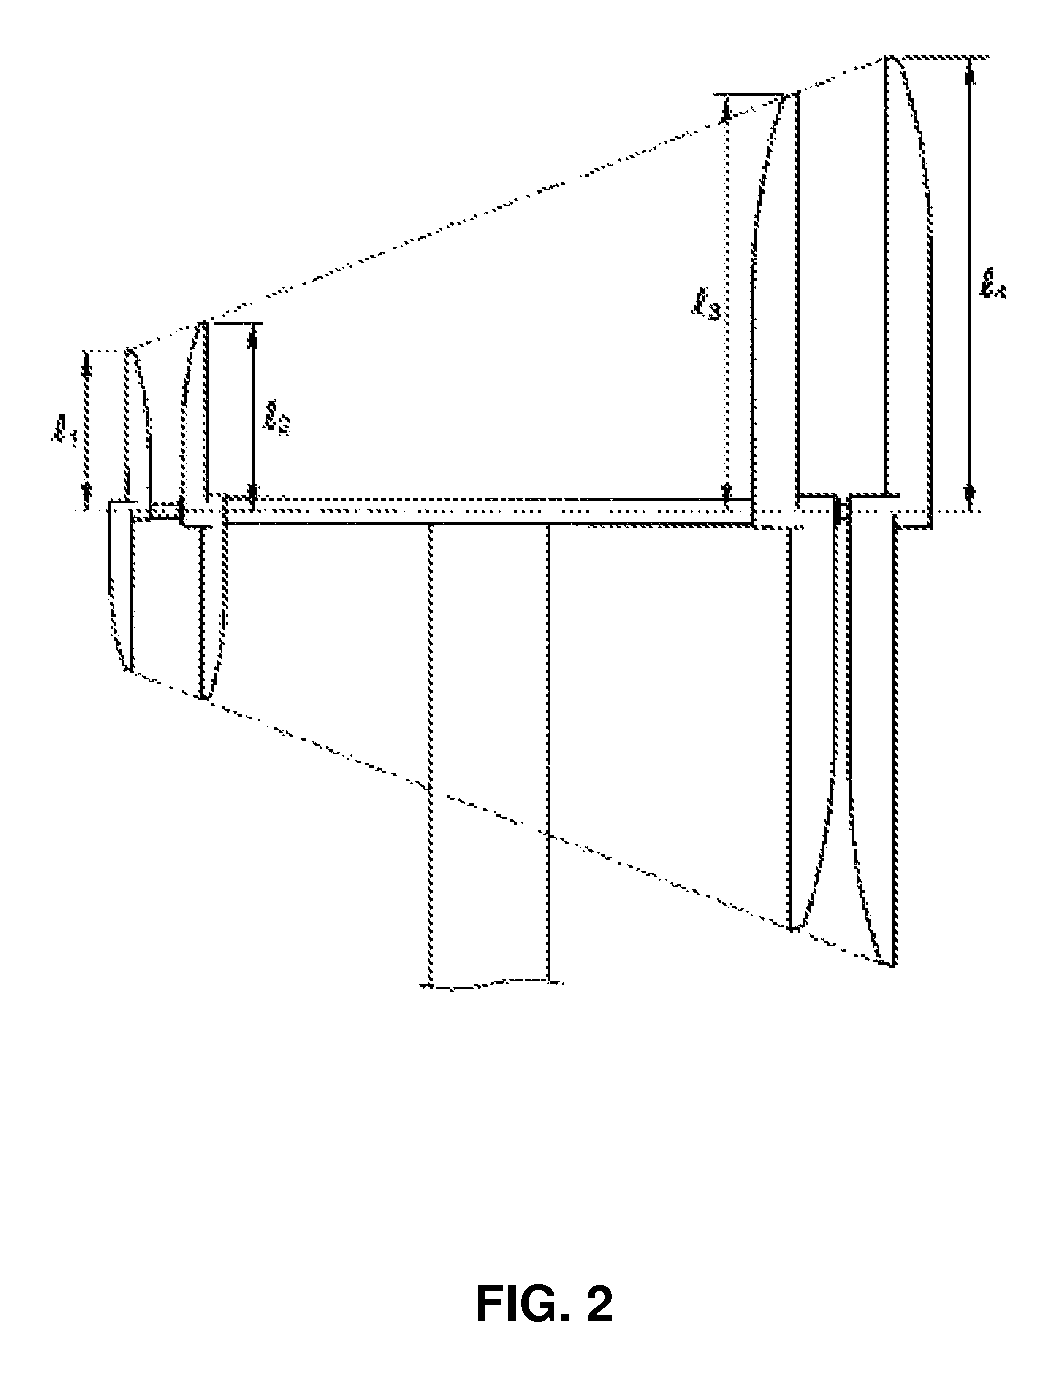 Windmill-type electric generation system